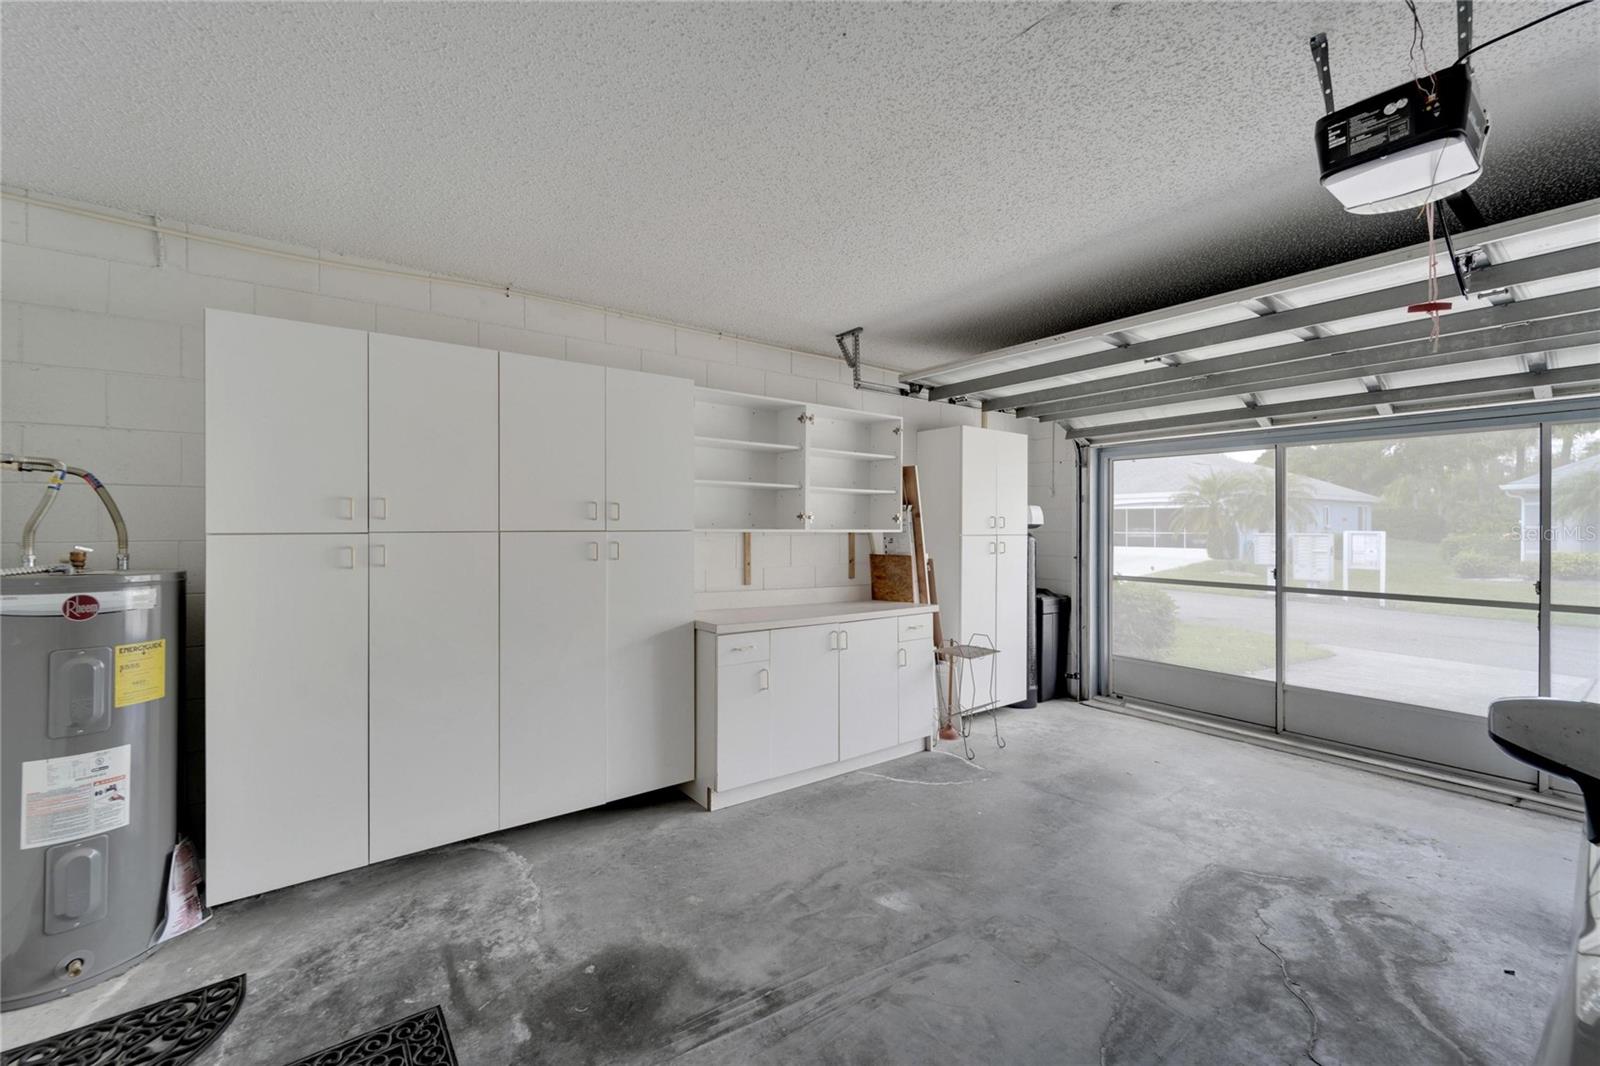 2 Car garage with remote control garage opener, with sliding screen doors and a wall full of cabinetry, as well as a countertop for small household projects.